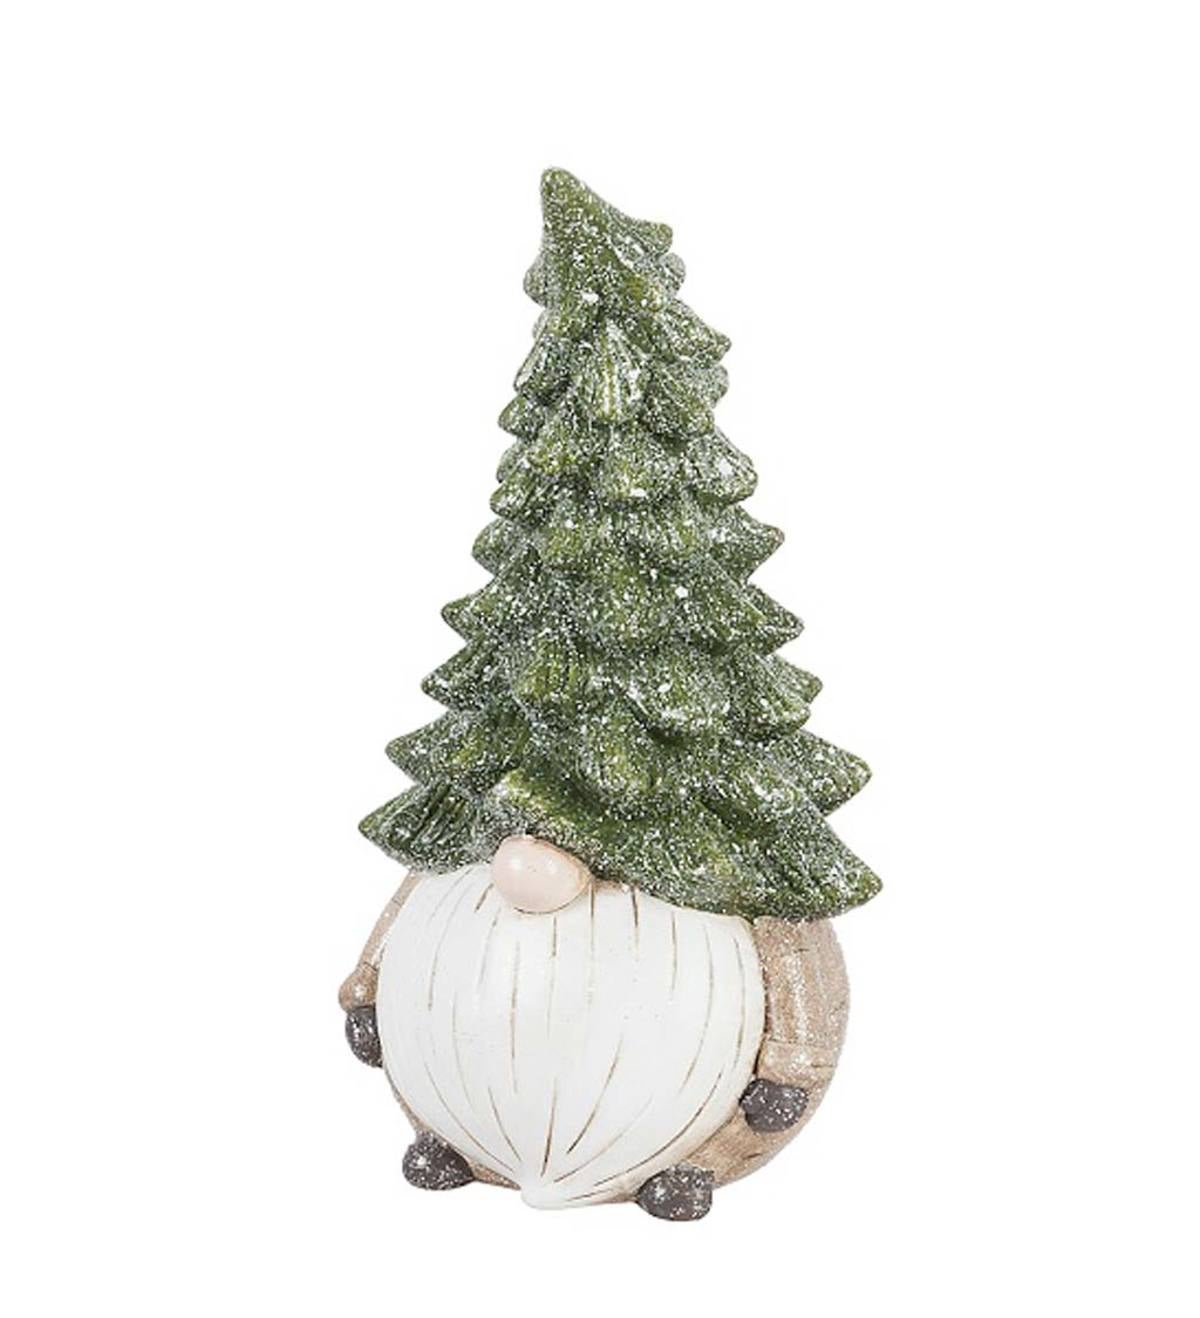 Ceramic Garden Gnome with Short Evergreen Tree Hat | Plow & Hearth